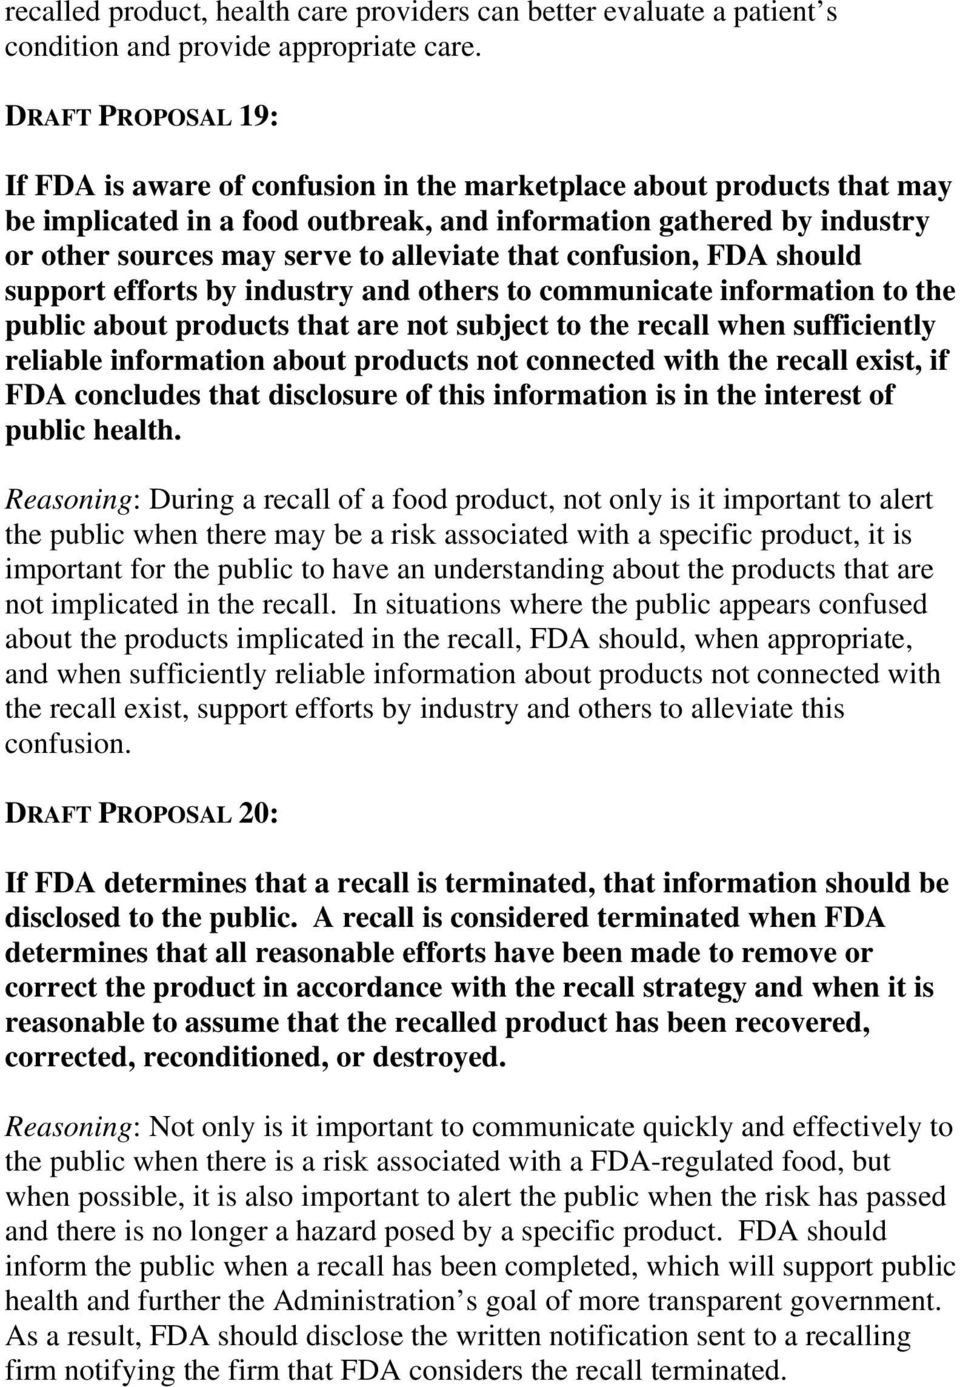 alleviate that confusion, FDA should support efforts by industry and others to communicate information to the public about products that are not subject to the recall when sufficiently reliable